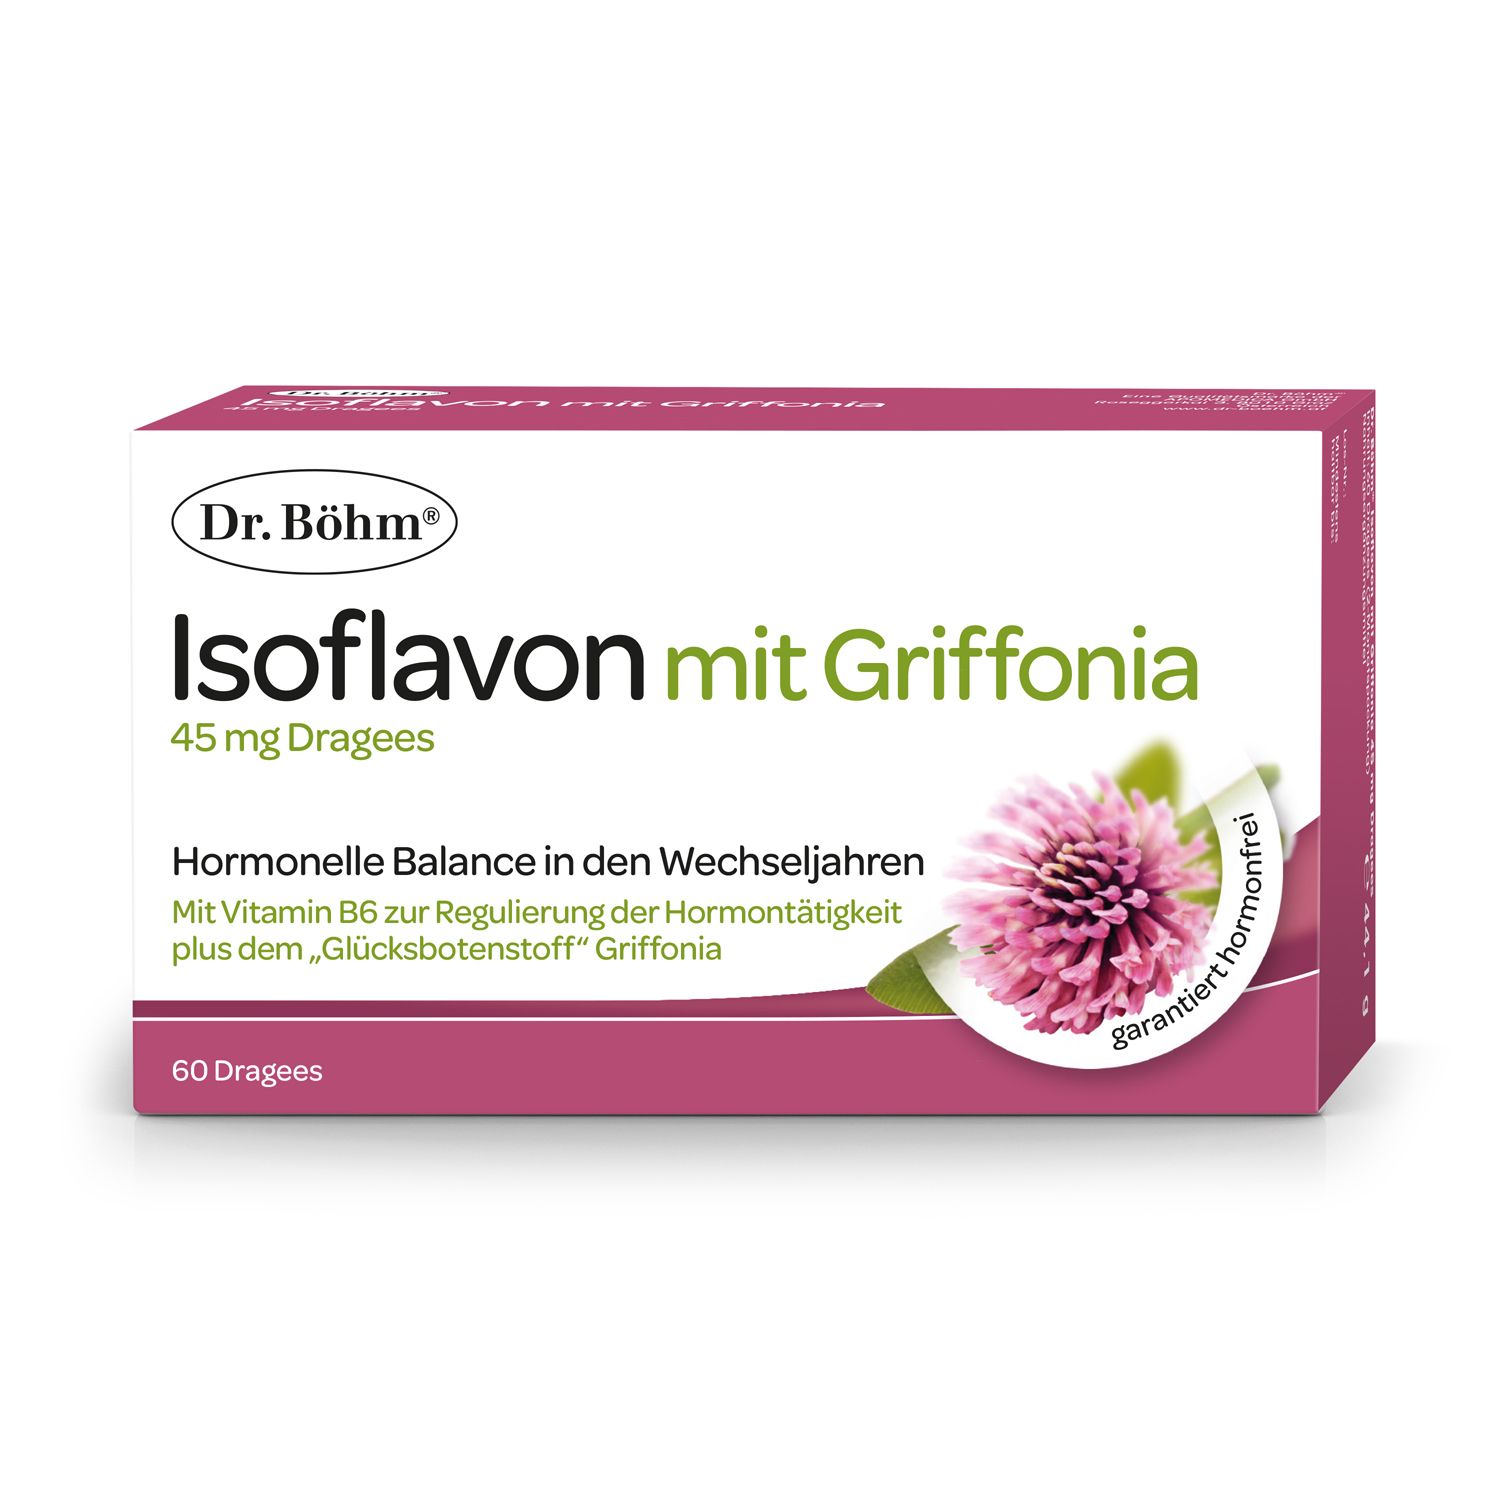 Dr. Böhm® Isoflavon 45 mg mit Griffonia Dragees